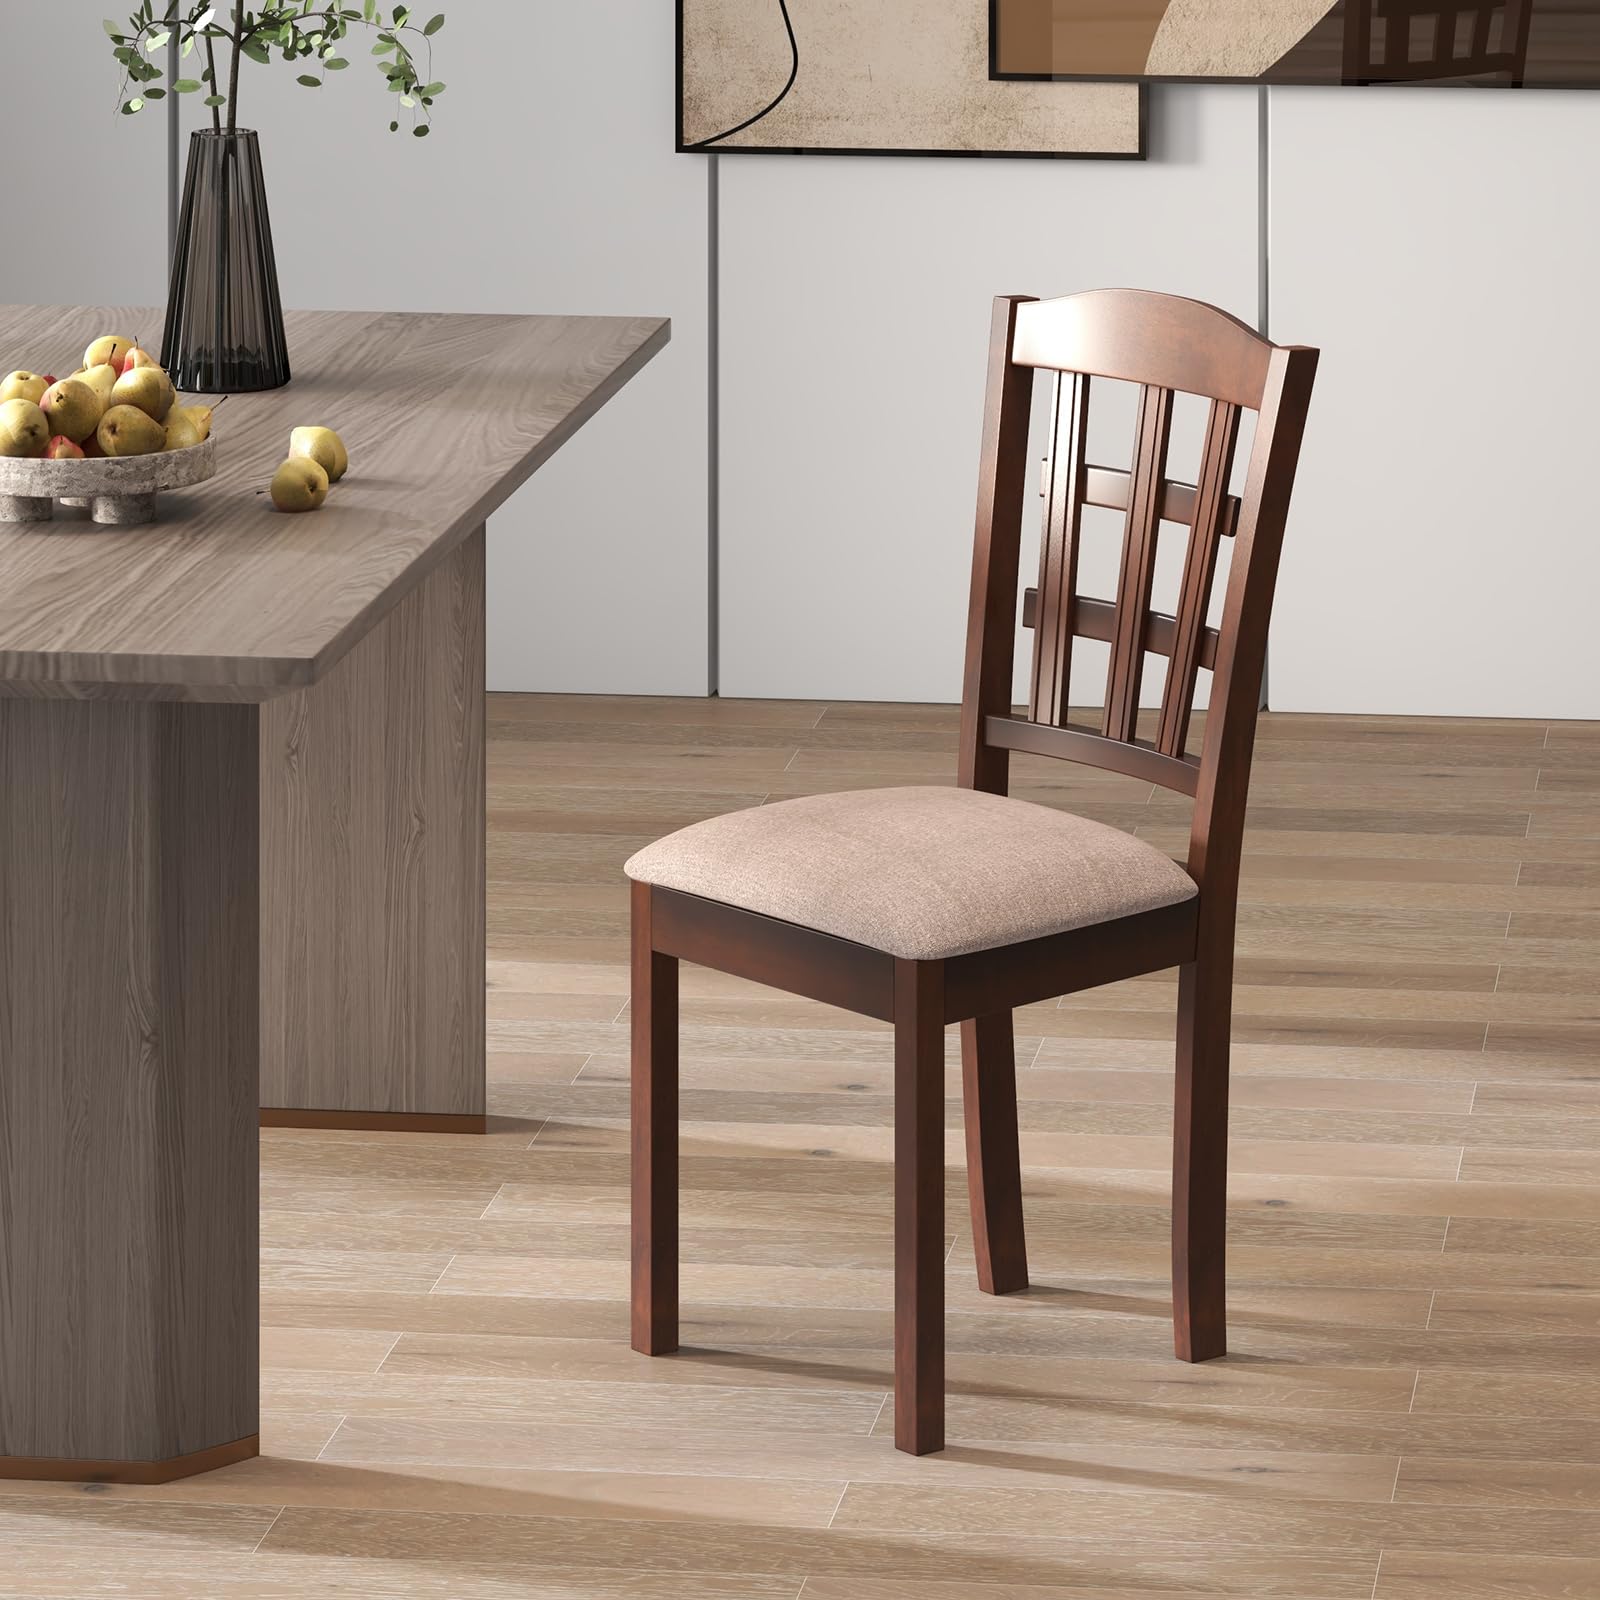 Giantex Wooden Dining Chair, Linen Fabric Padded Kitchen Chairs